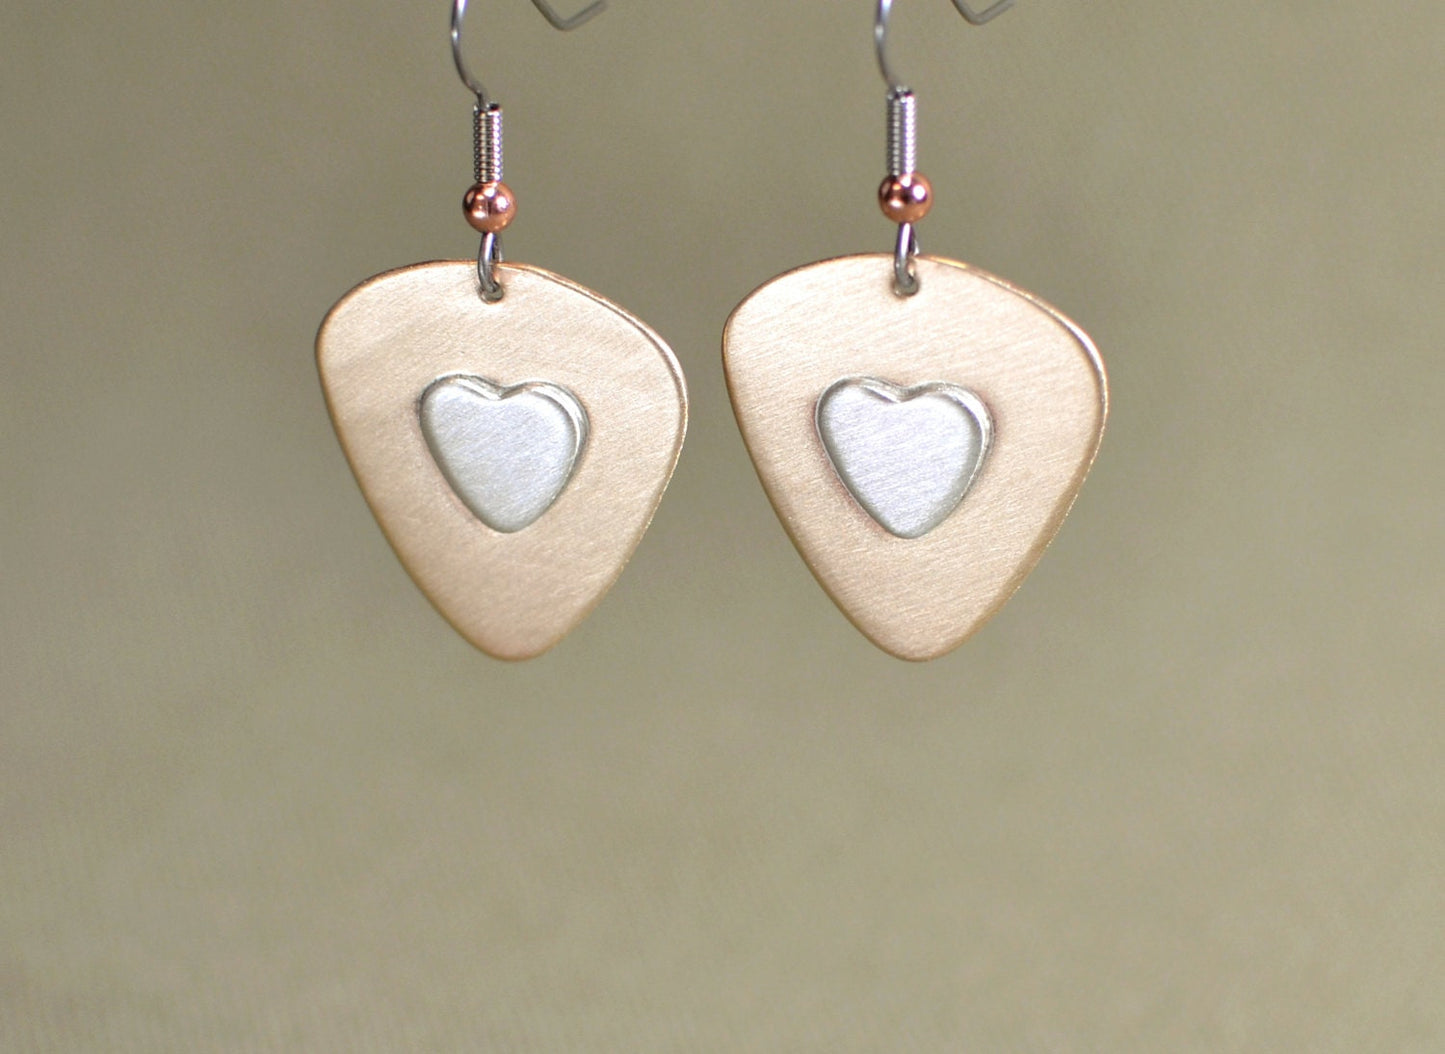 Guitar pick dangle earrings with sterling silver hearts